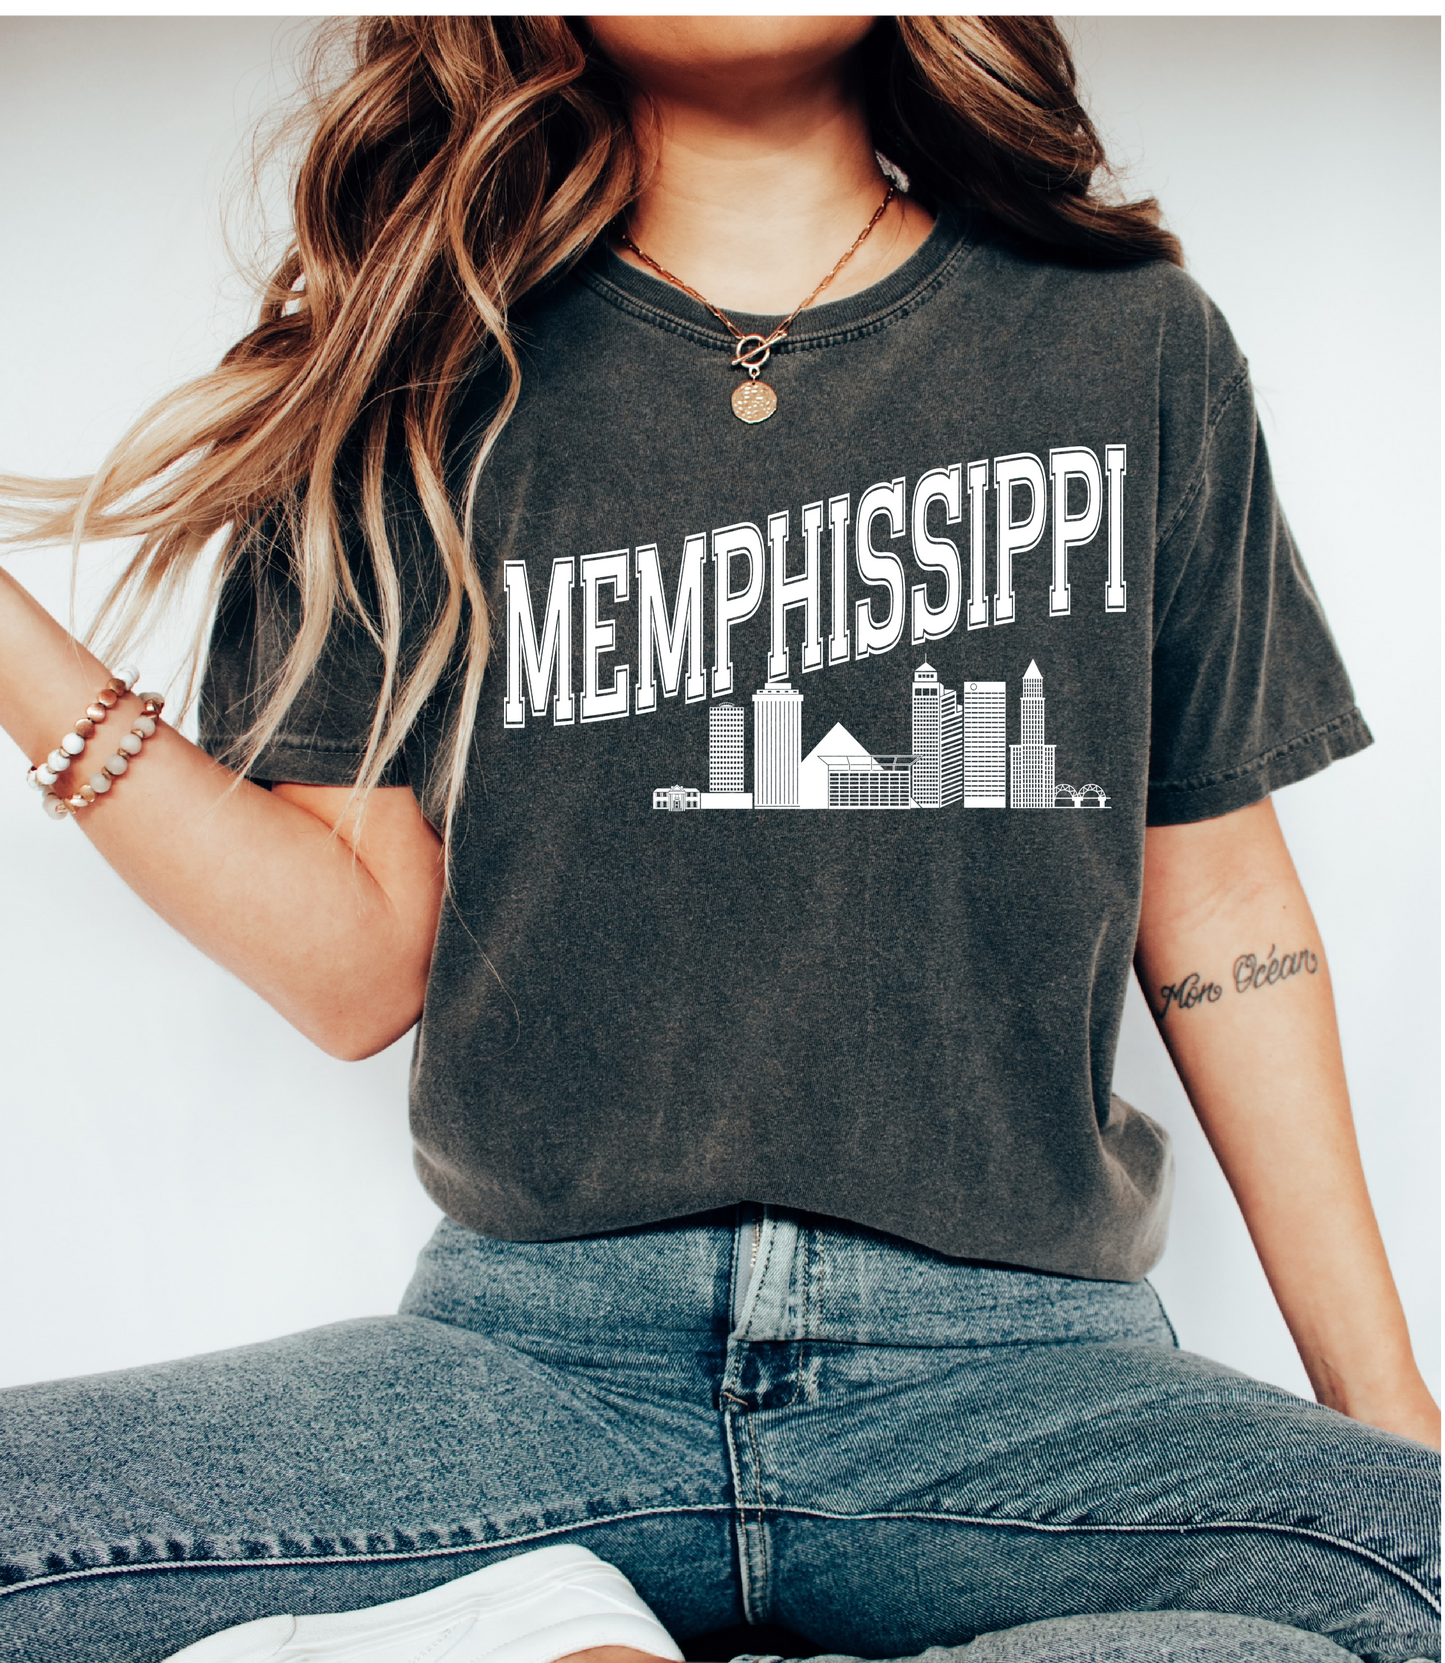 Youth and Adult Memphissippi Tee/ Comfort Colors or Bella / Memphis - Mississippi Shirt